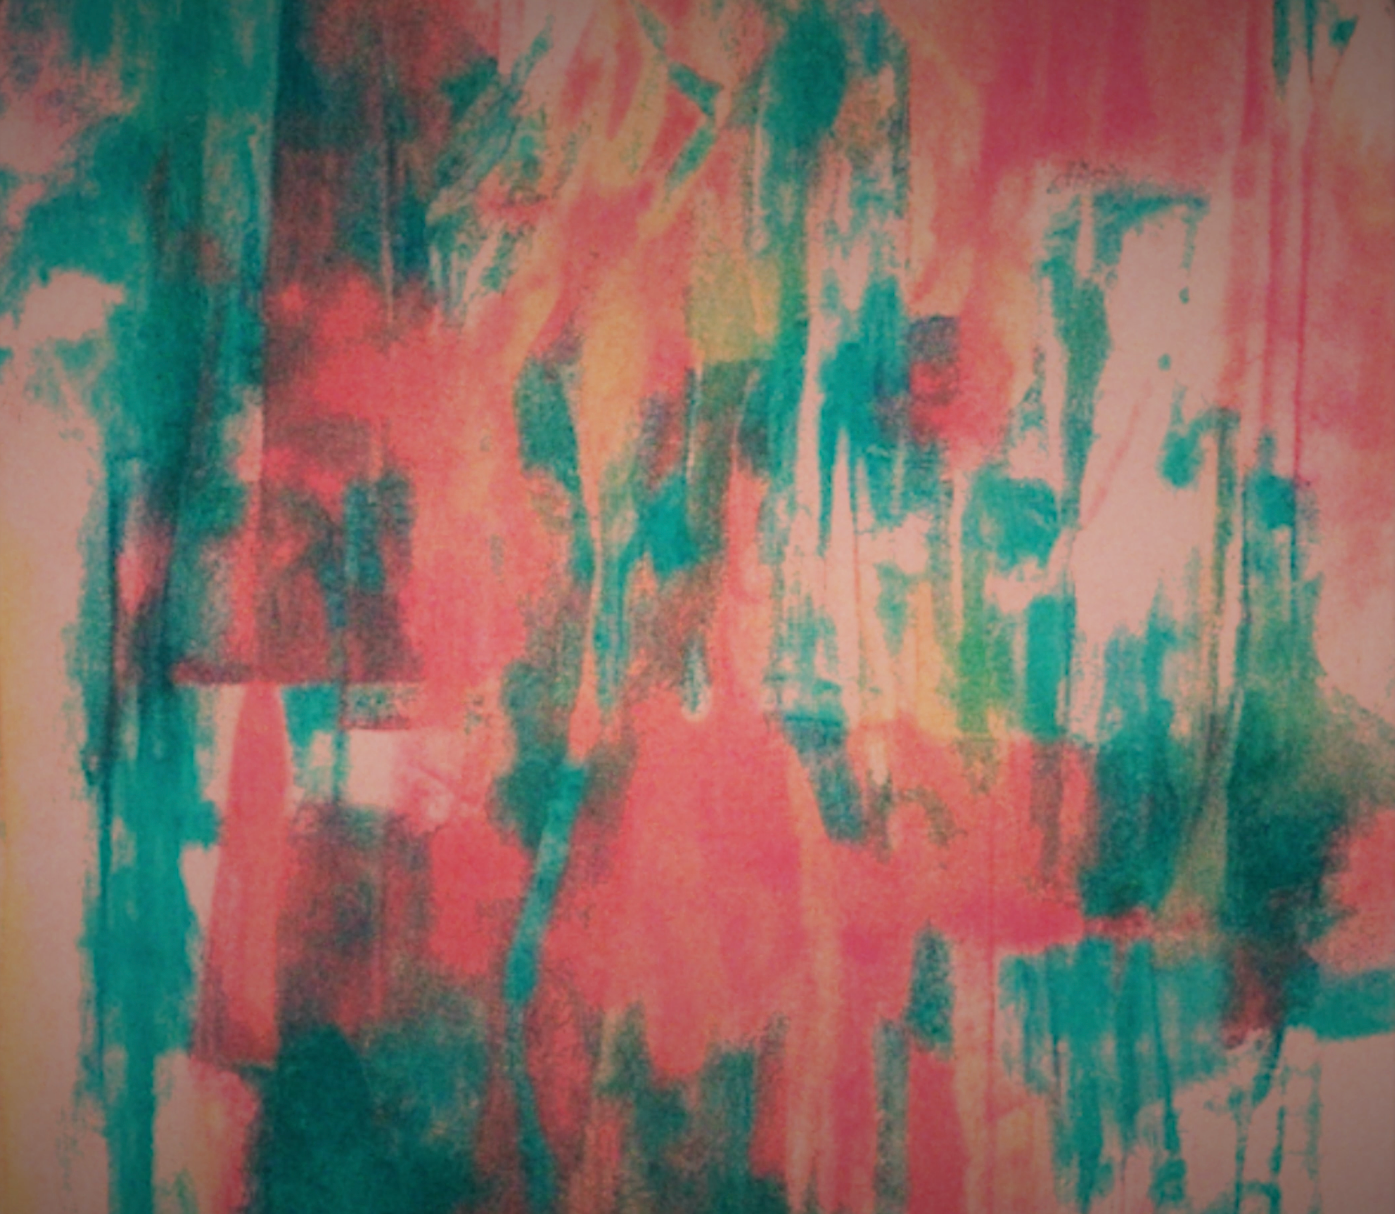 A still frame from Tony Yanick's video 'BOBBI LYNN' shows fabric with variously coloured marks.
